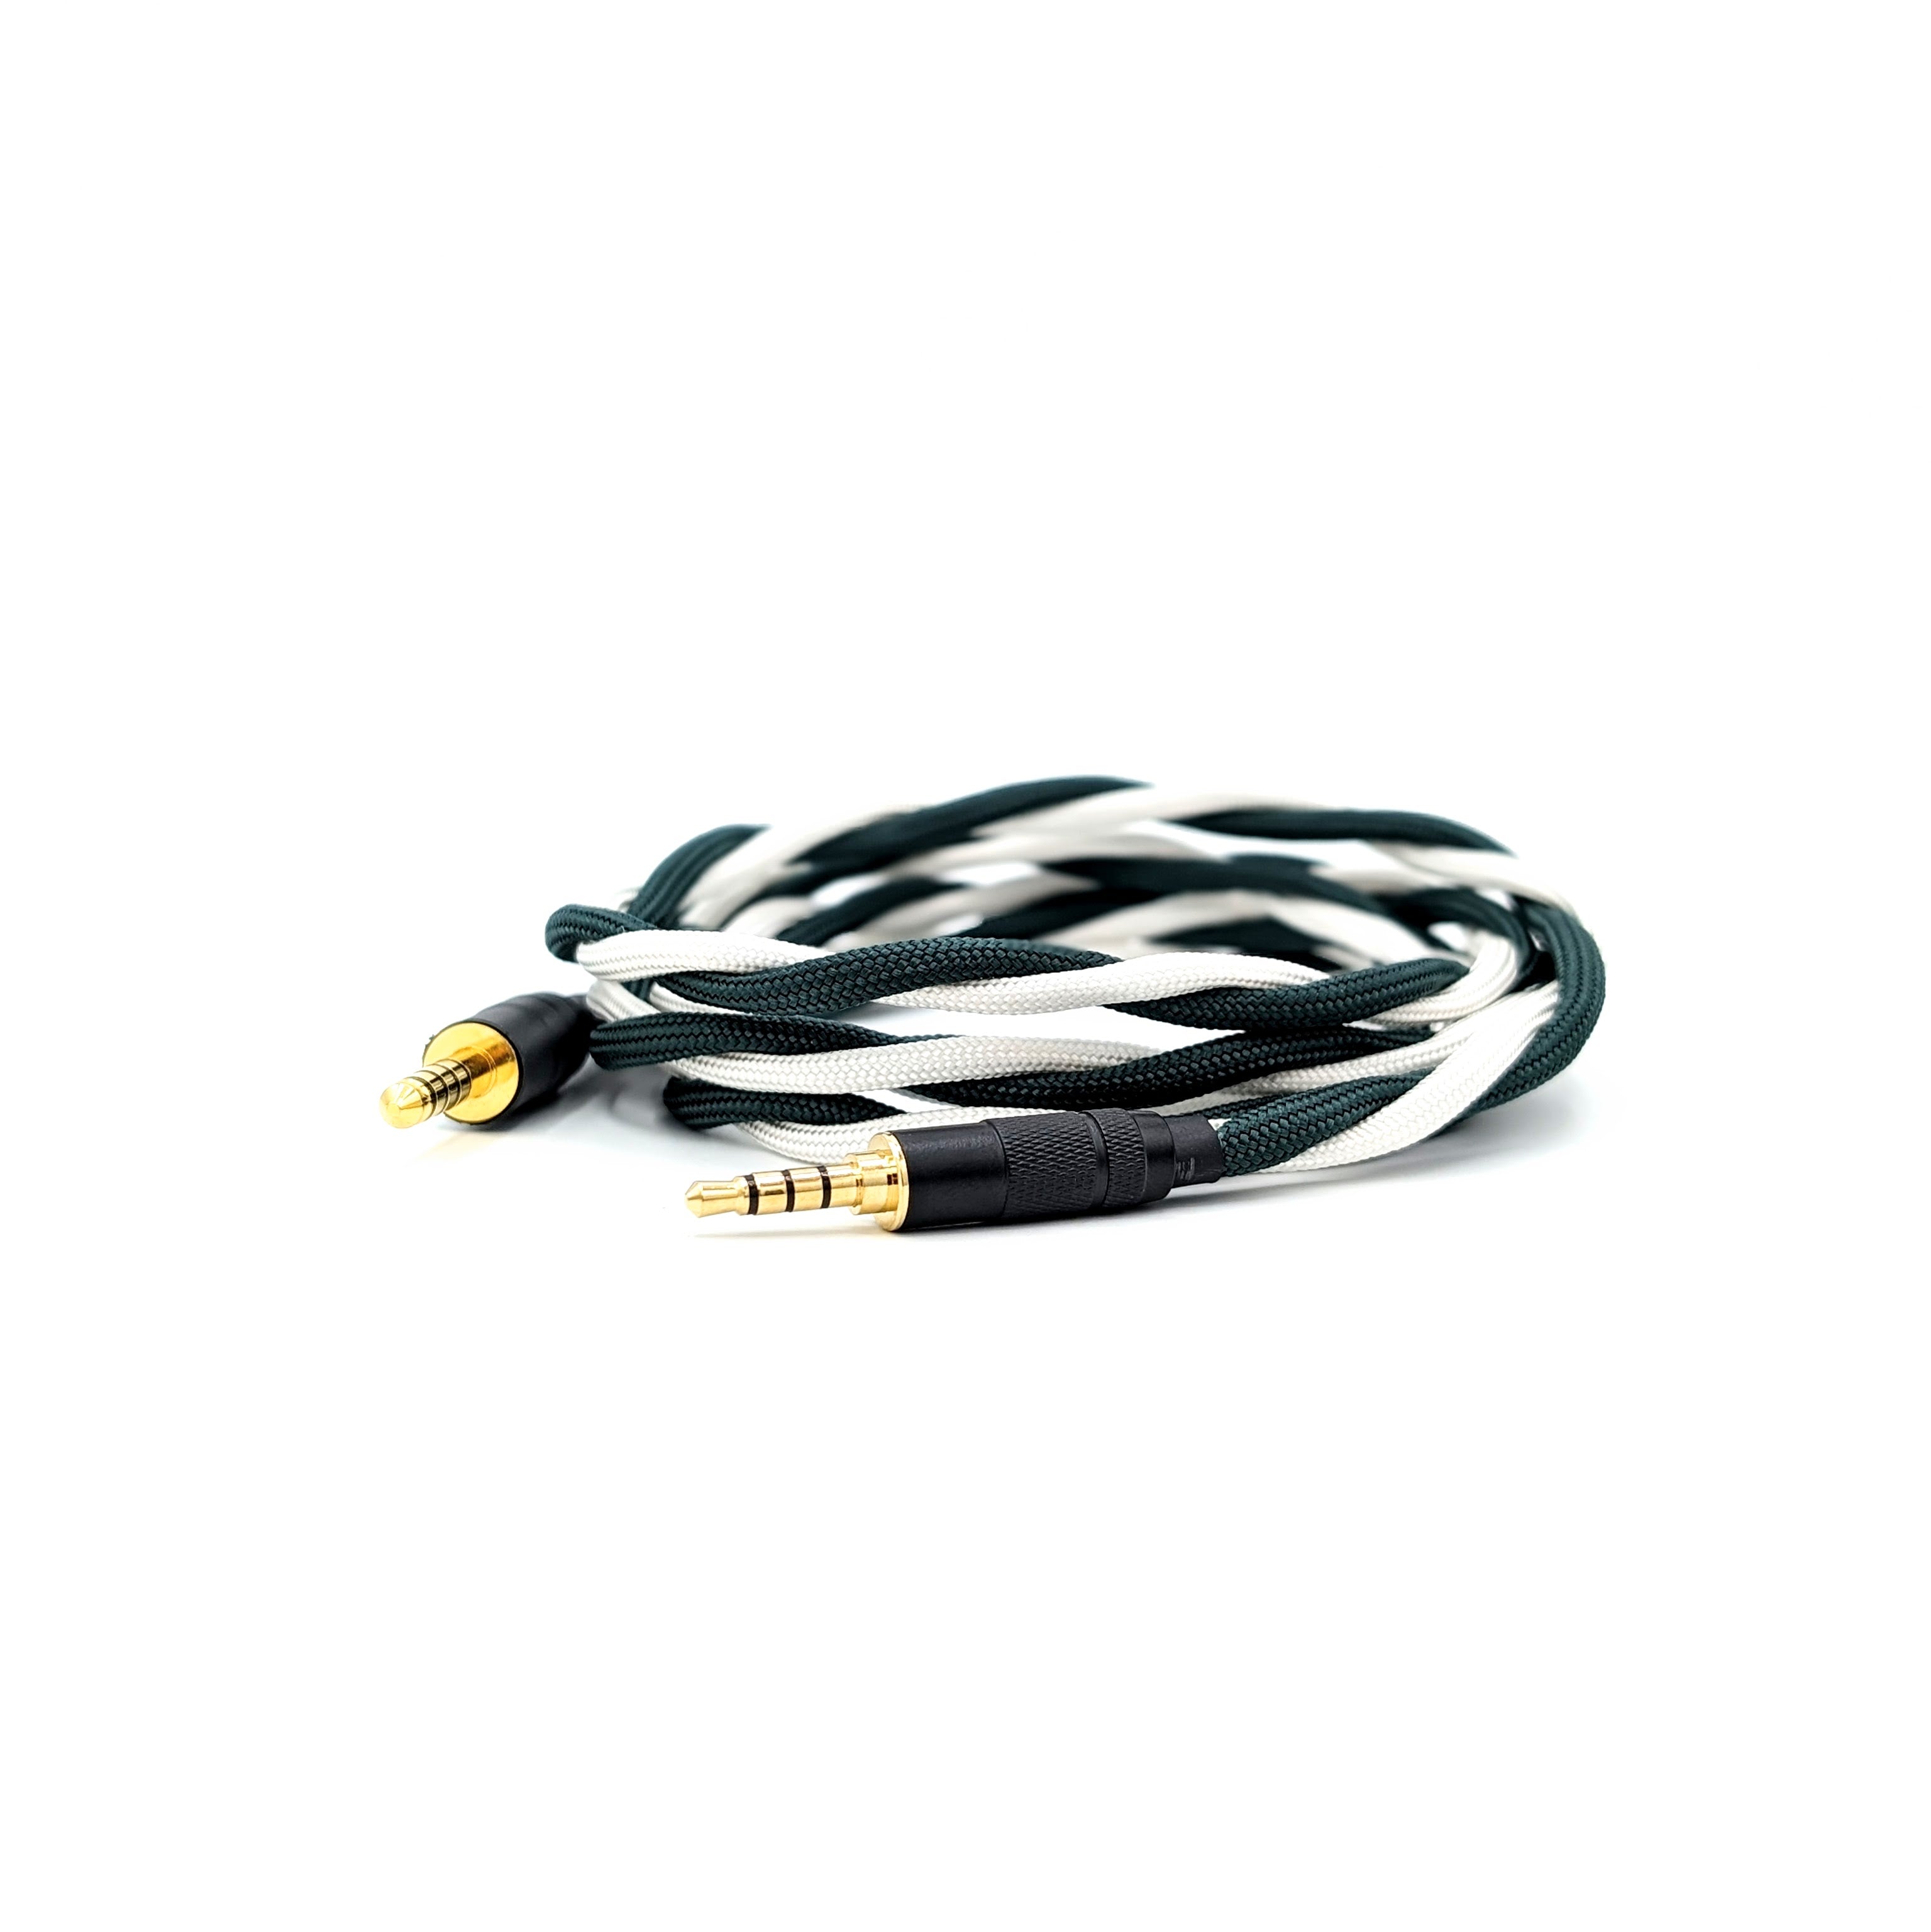 Custom Twisted Braid 3.5mm TRRS headphone cable for T60RP, HD 490 Pro, Deva Pro, HER9 and more